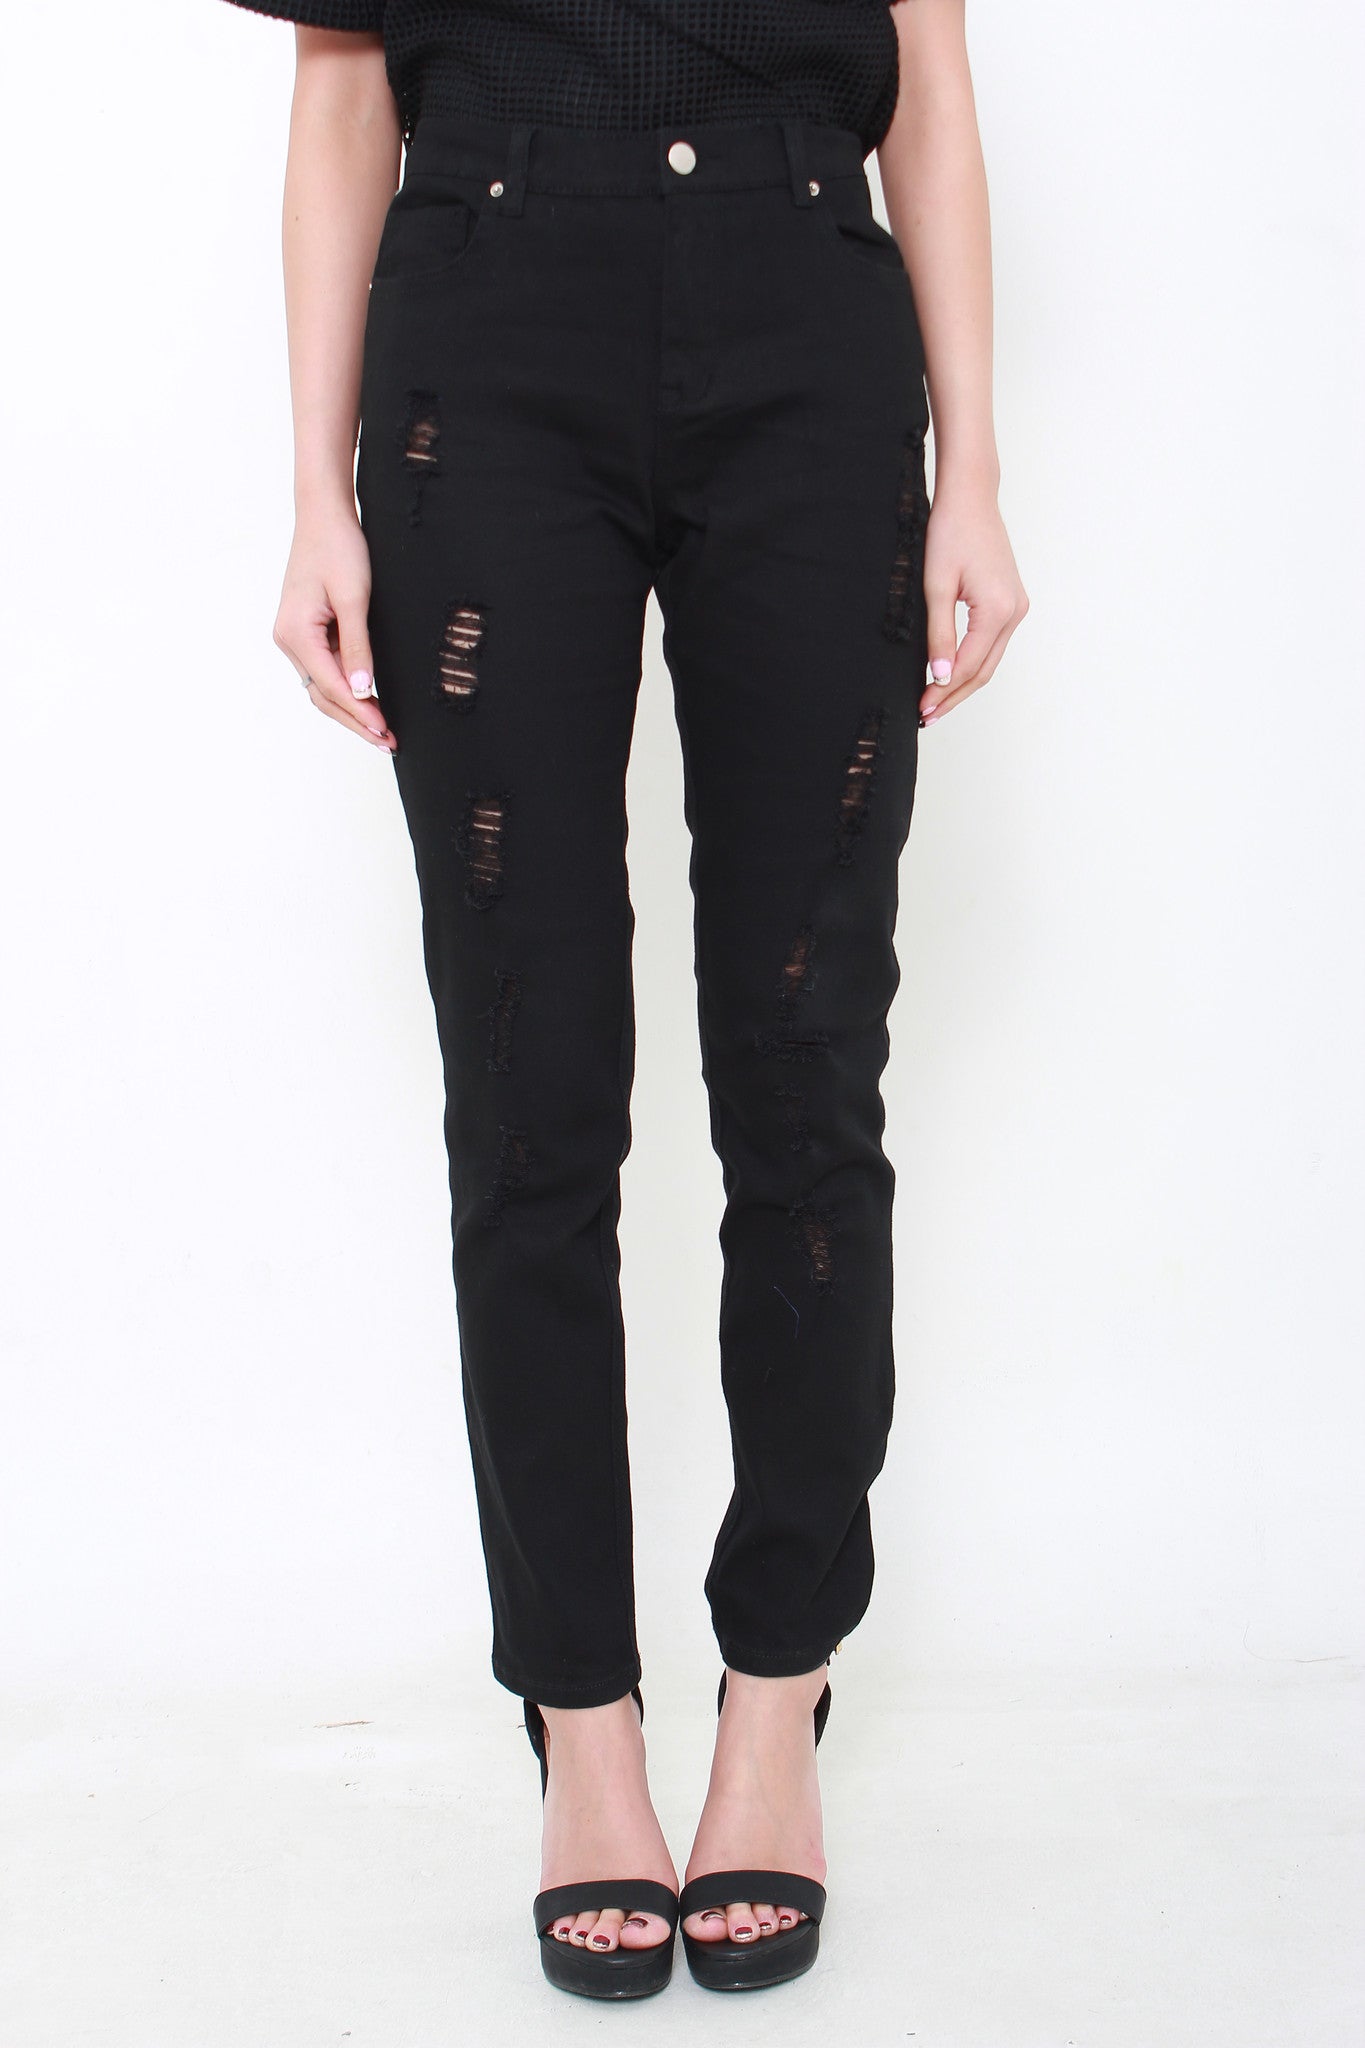 Rip It Up Jeans in Black